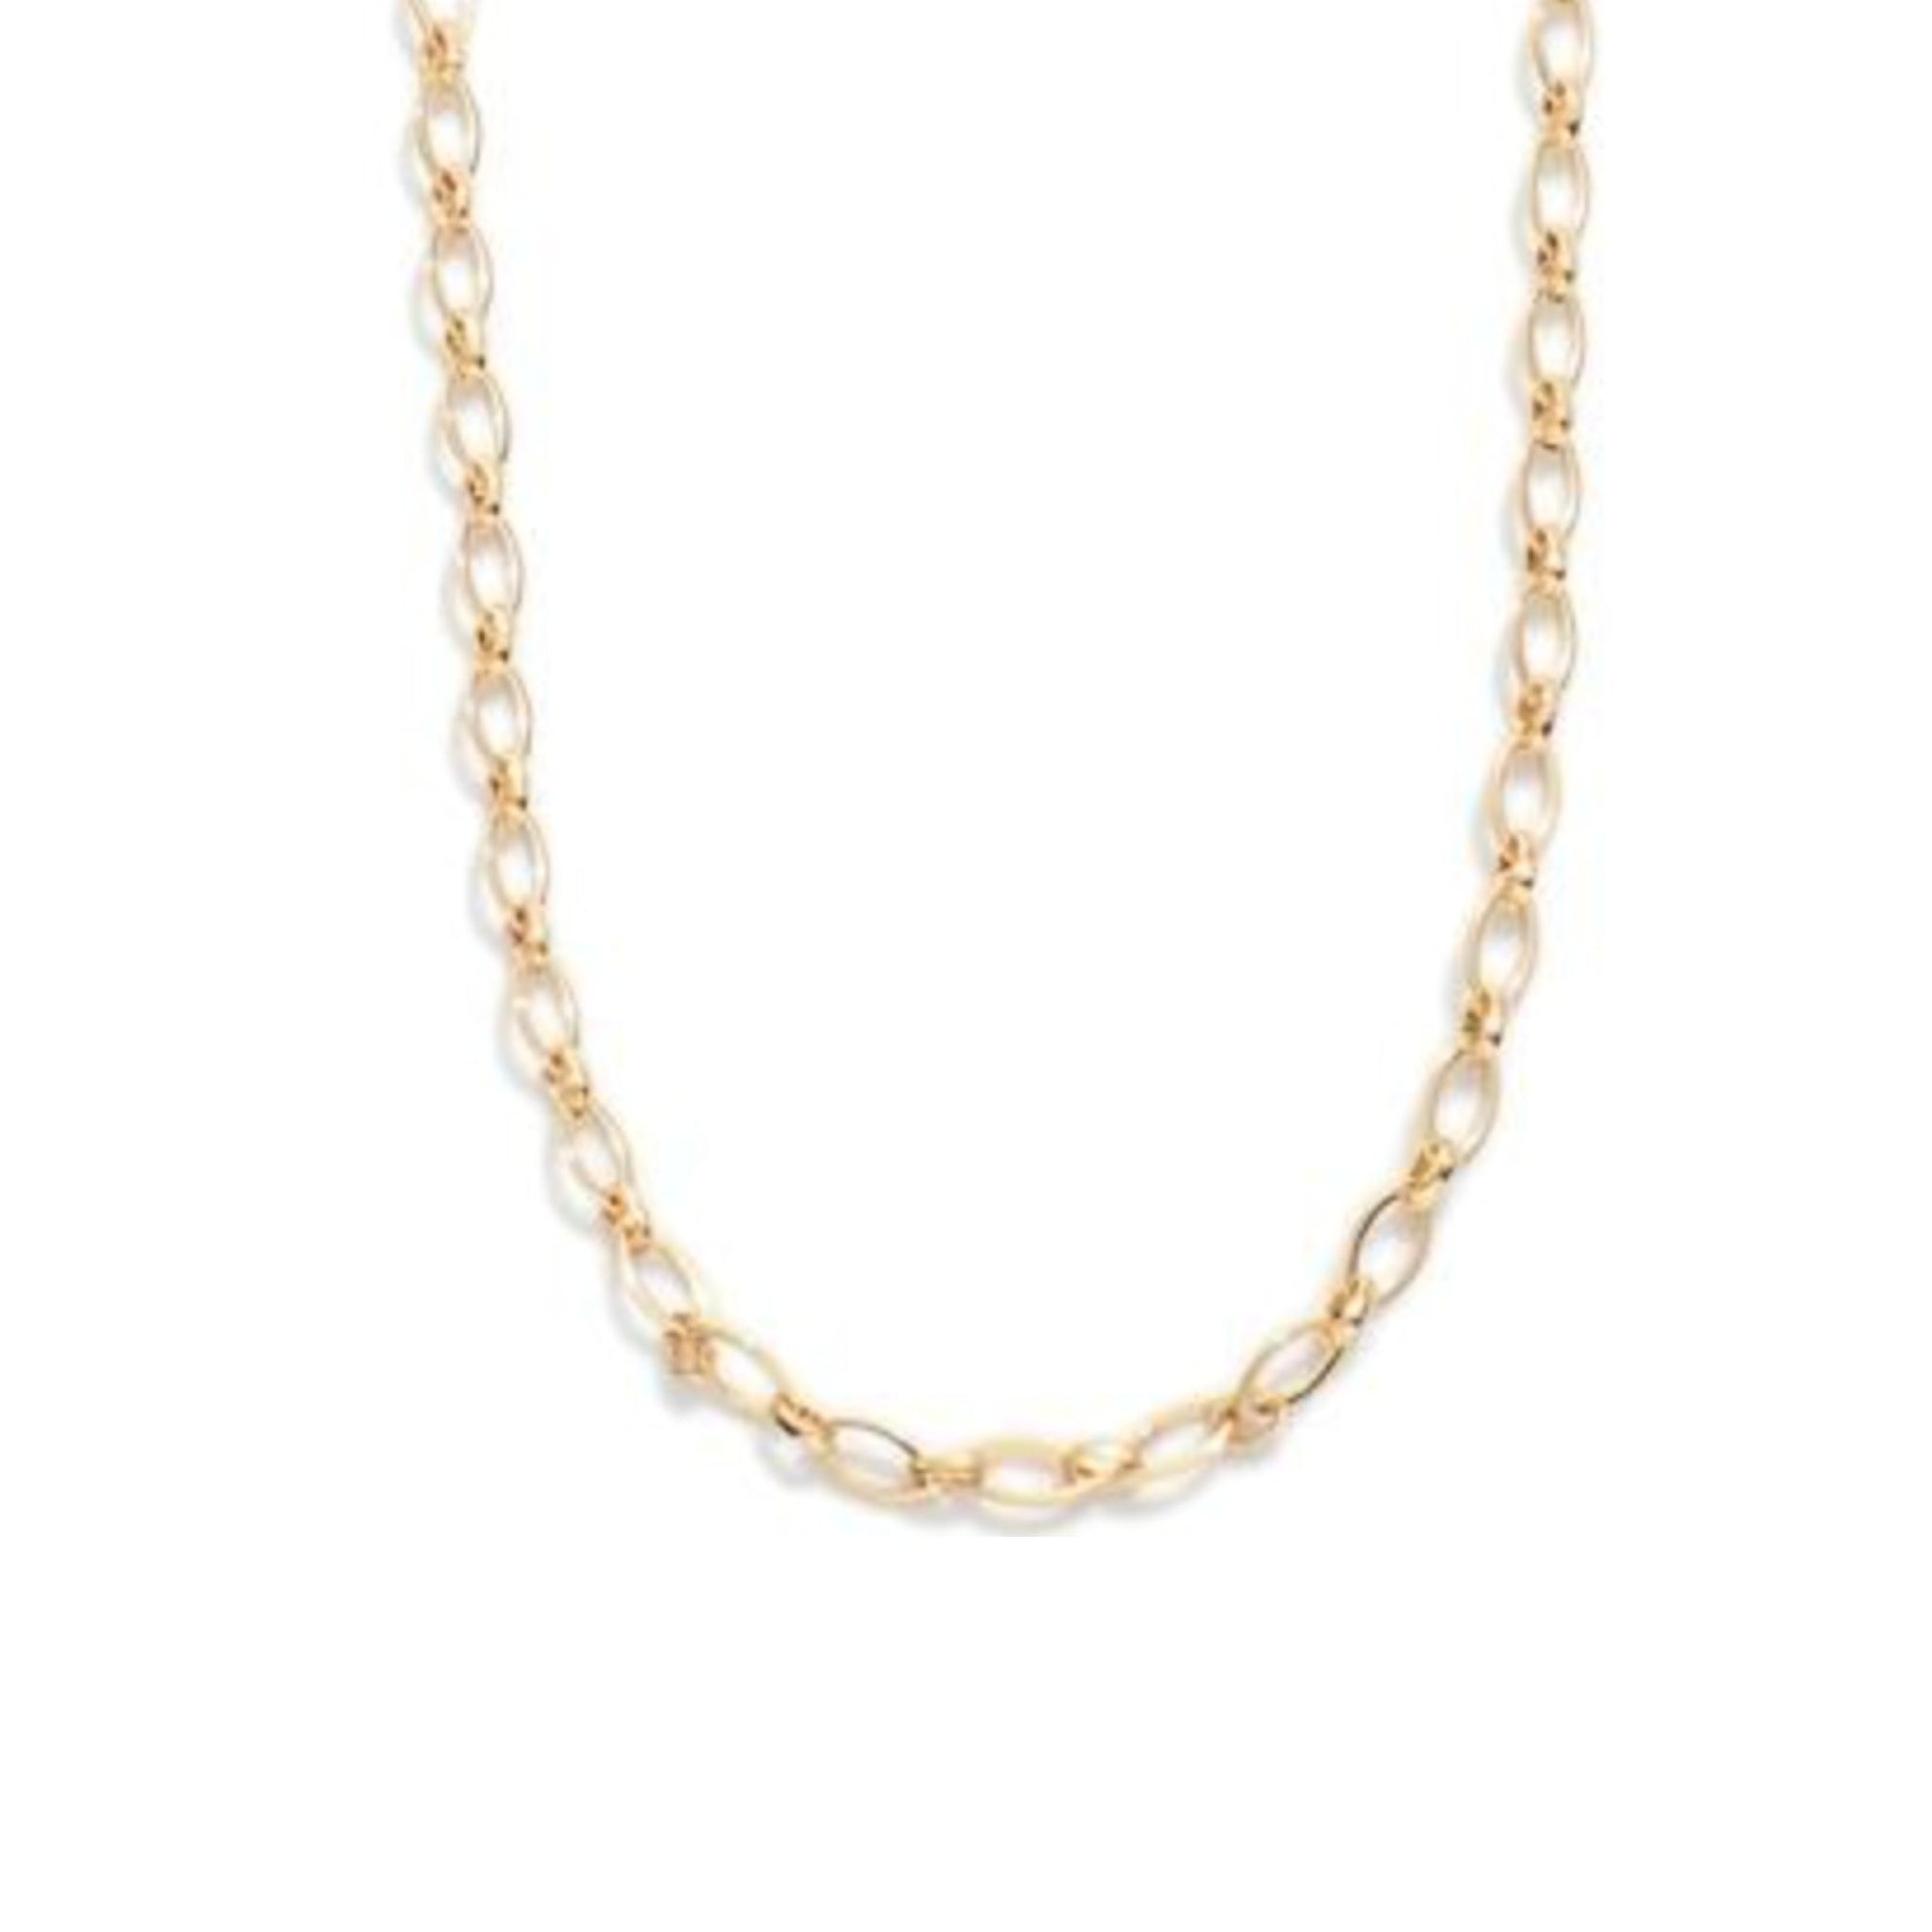 Veronica Chain Link Necklace